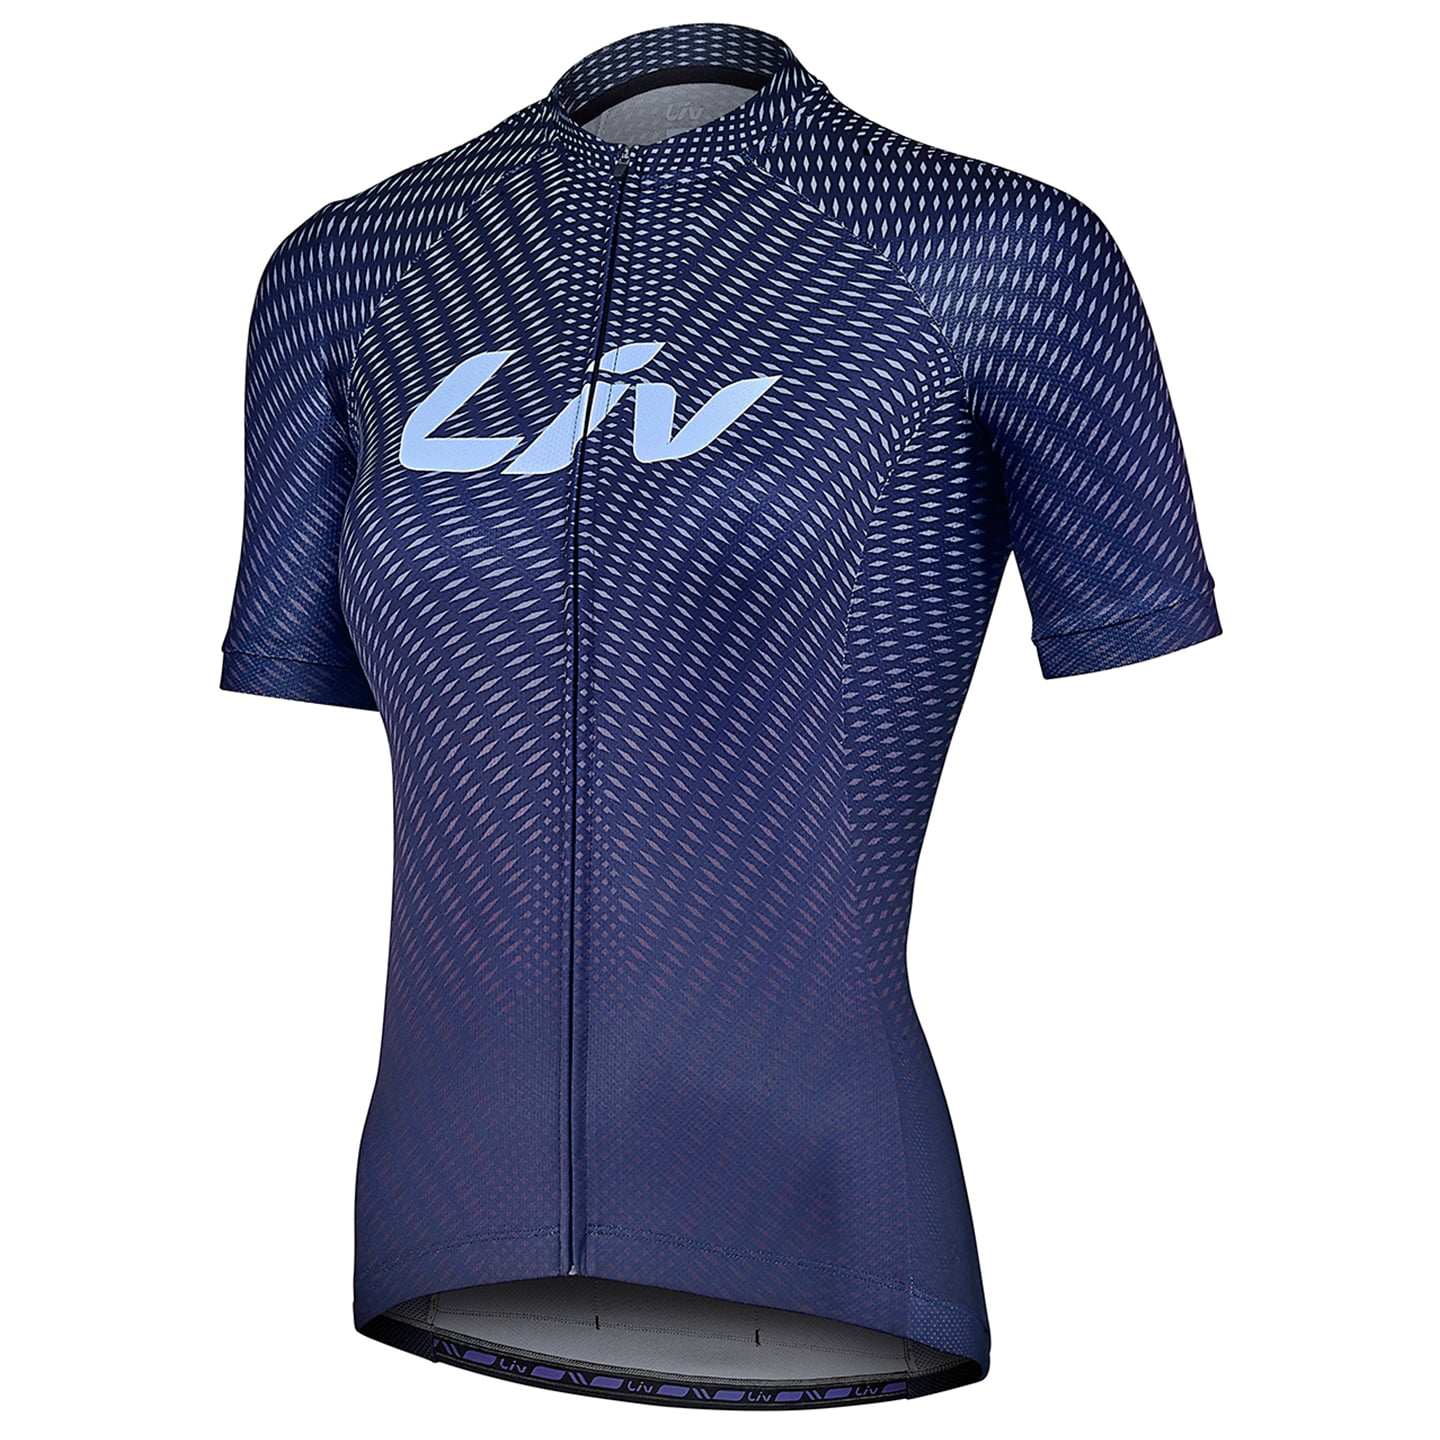 LIV Beliv Women’s Jersey Women’s Short Sleeve Jersey, size M, Cycling jersey, Cycle clothing